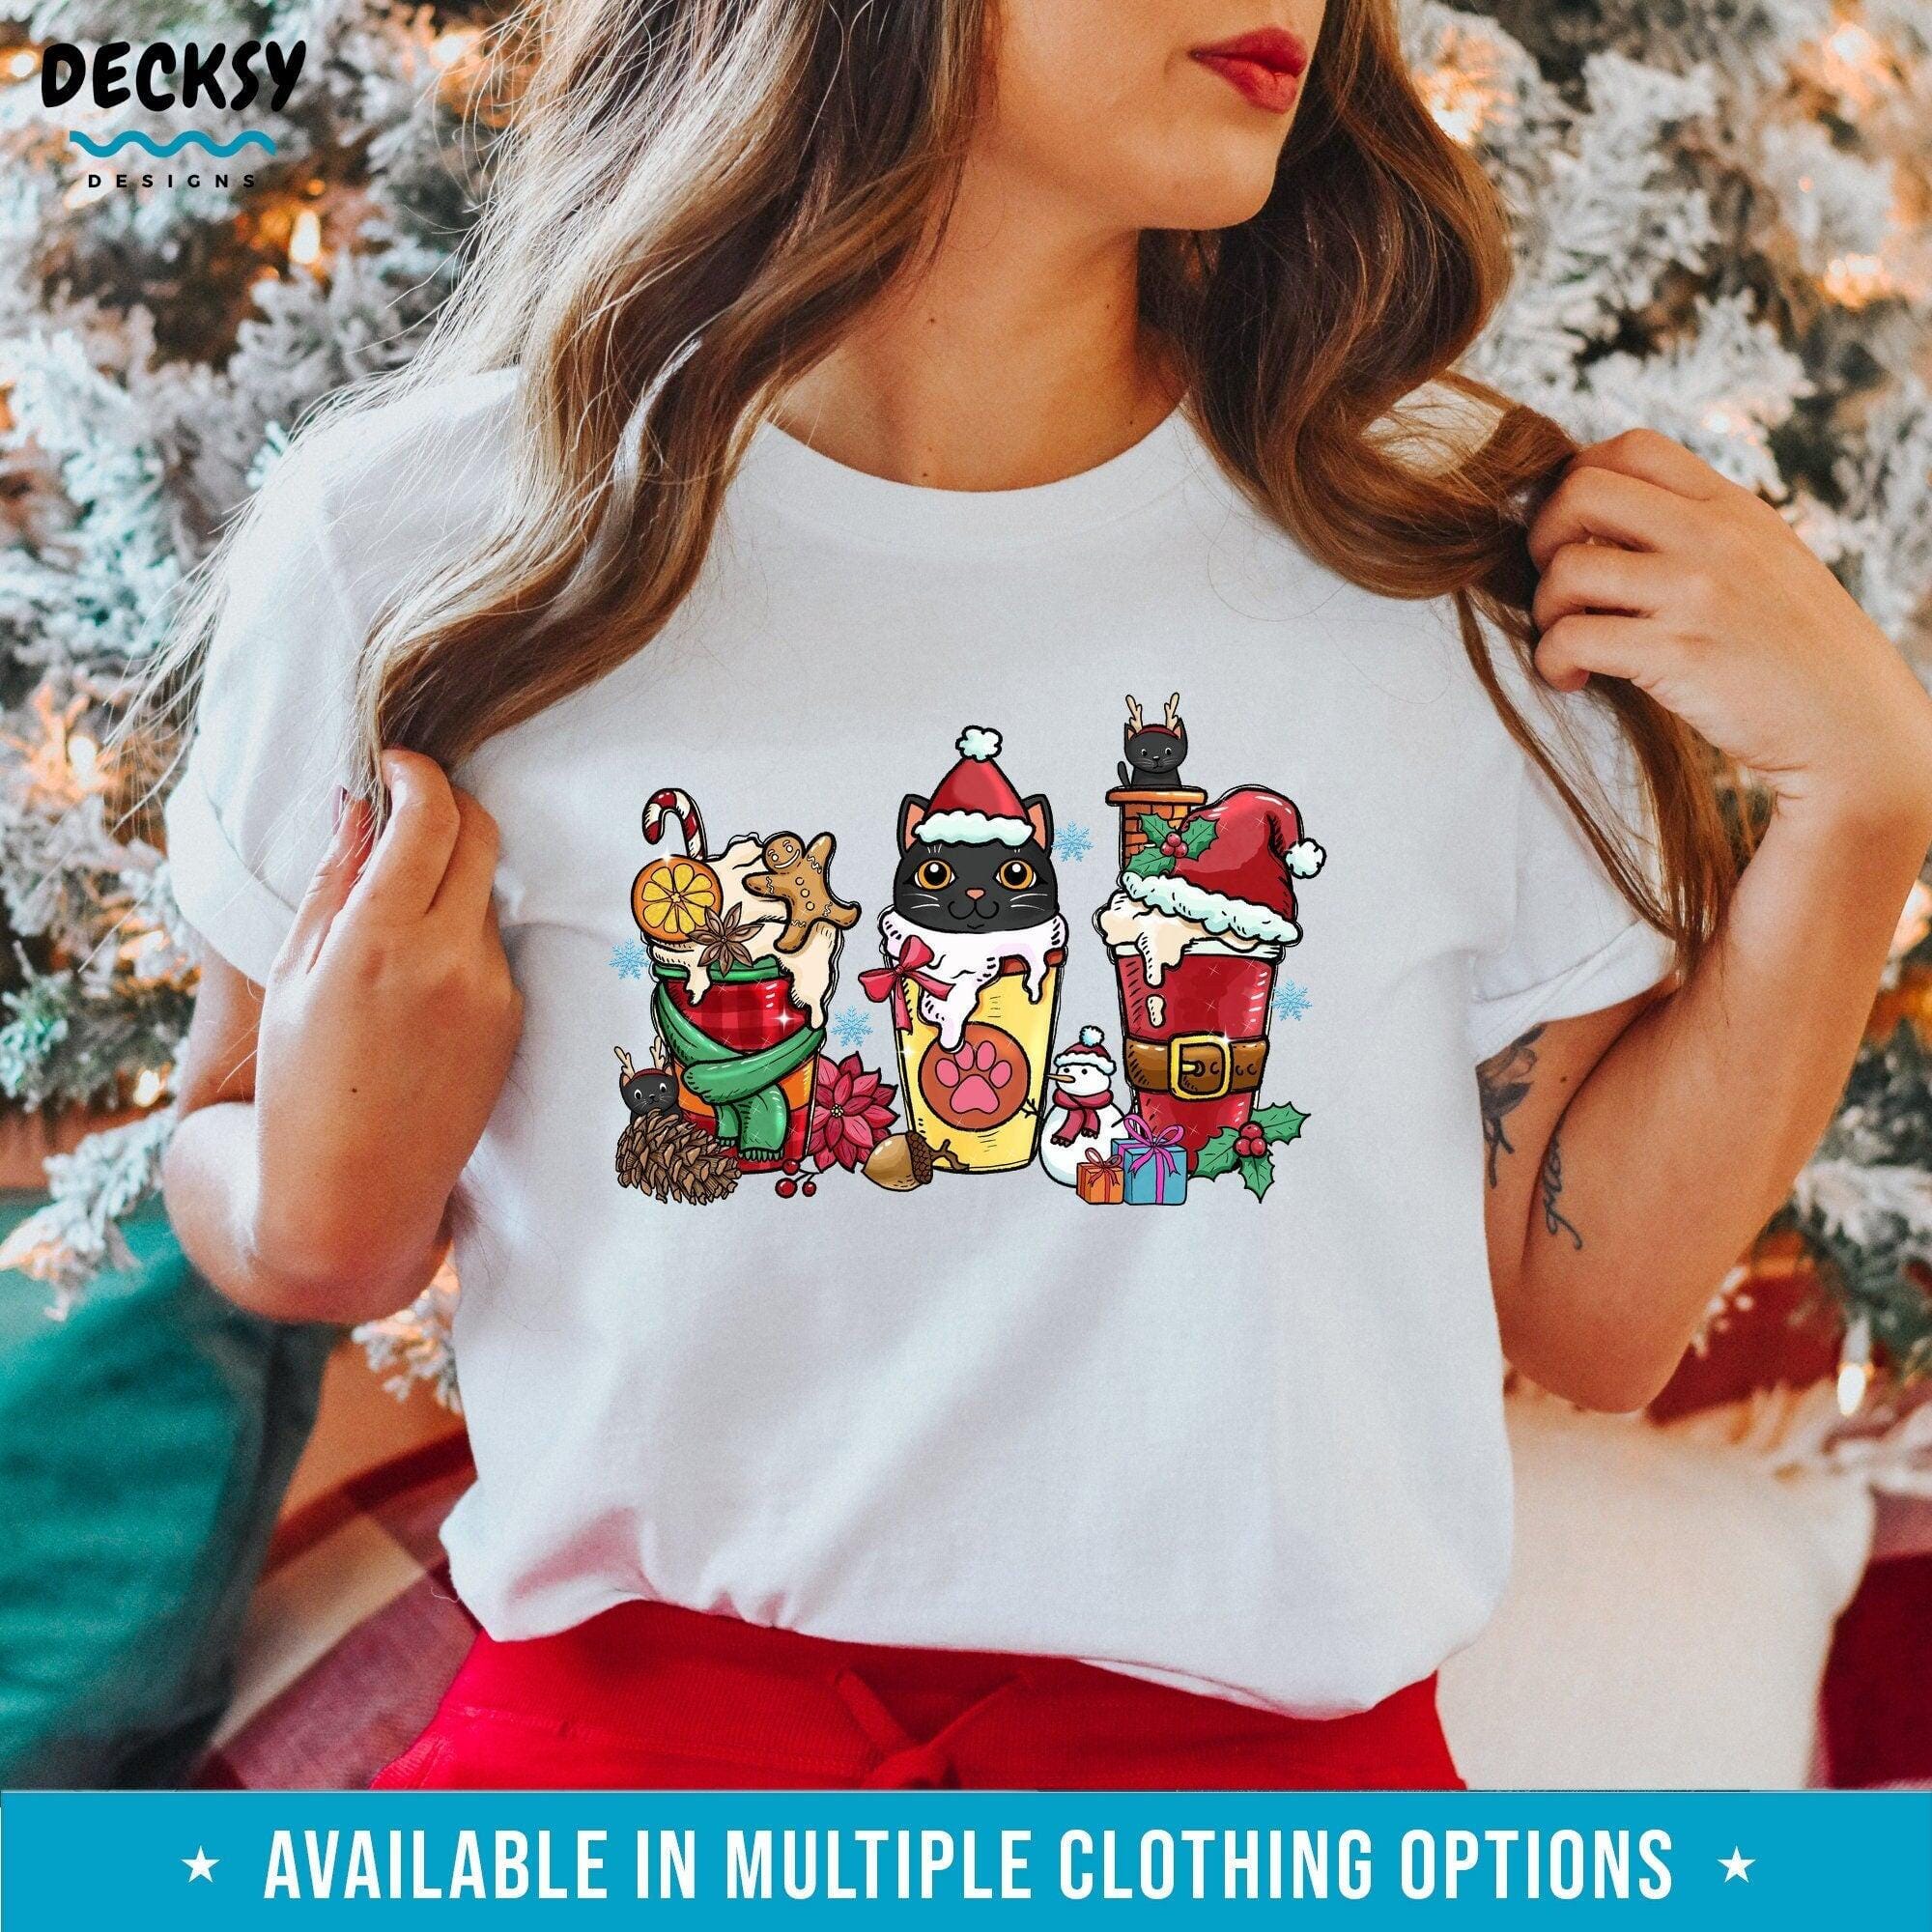 Christmas Cat Shirt, Xmas Gift for Cat Owner-Clothing:Gender-Neutral Adult Clothing:Tops & Tees:T-shirts:Graphic Tees-DecksyDesigns